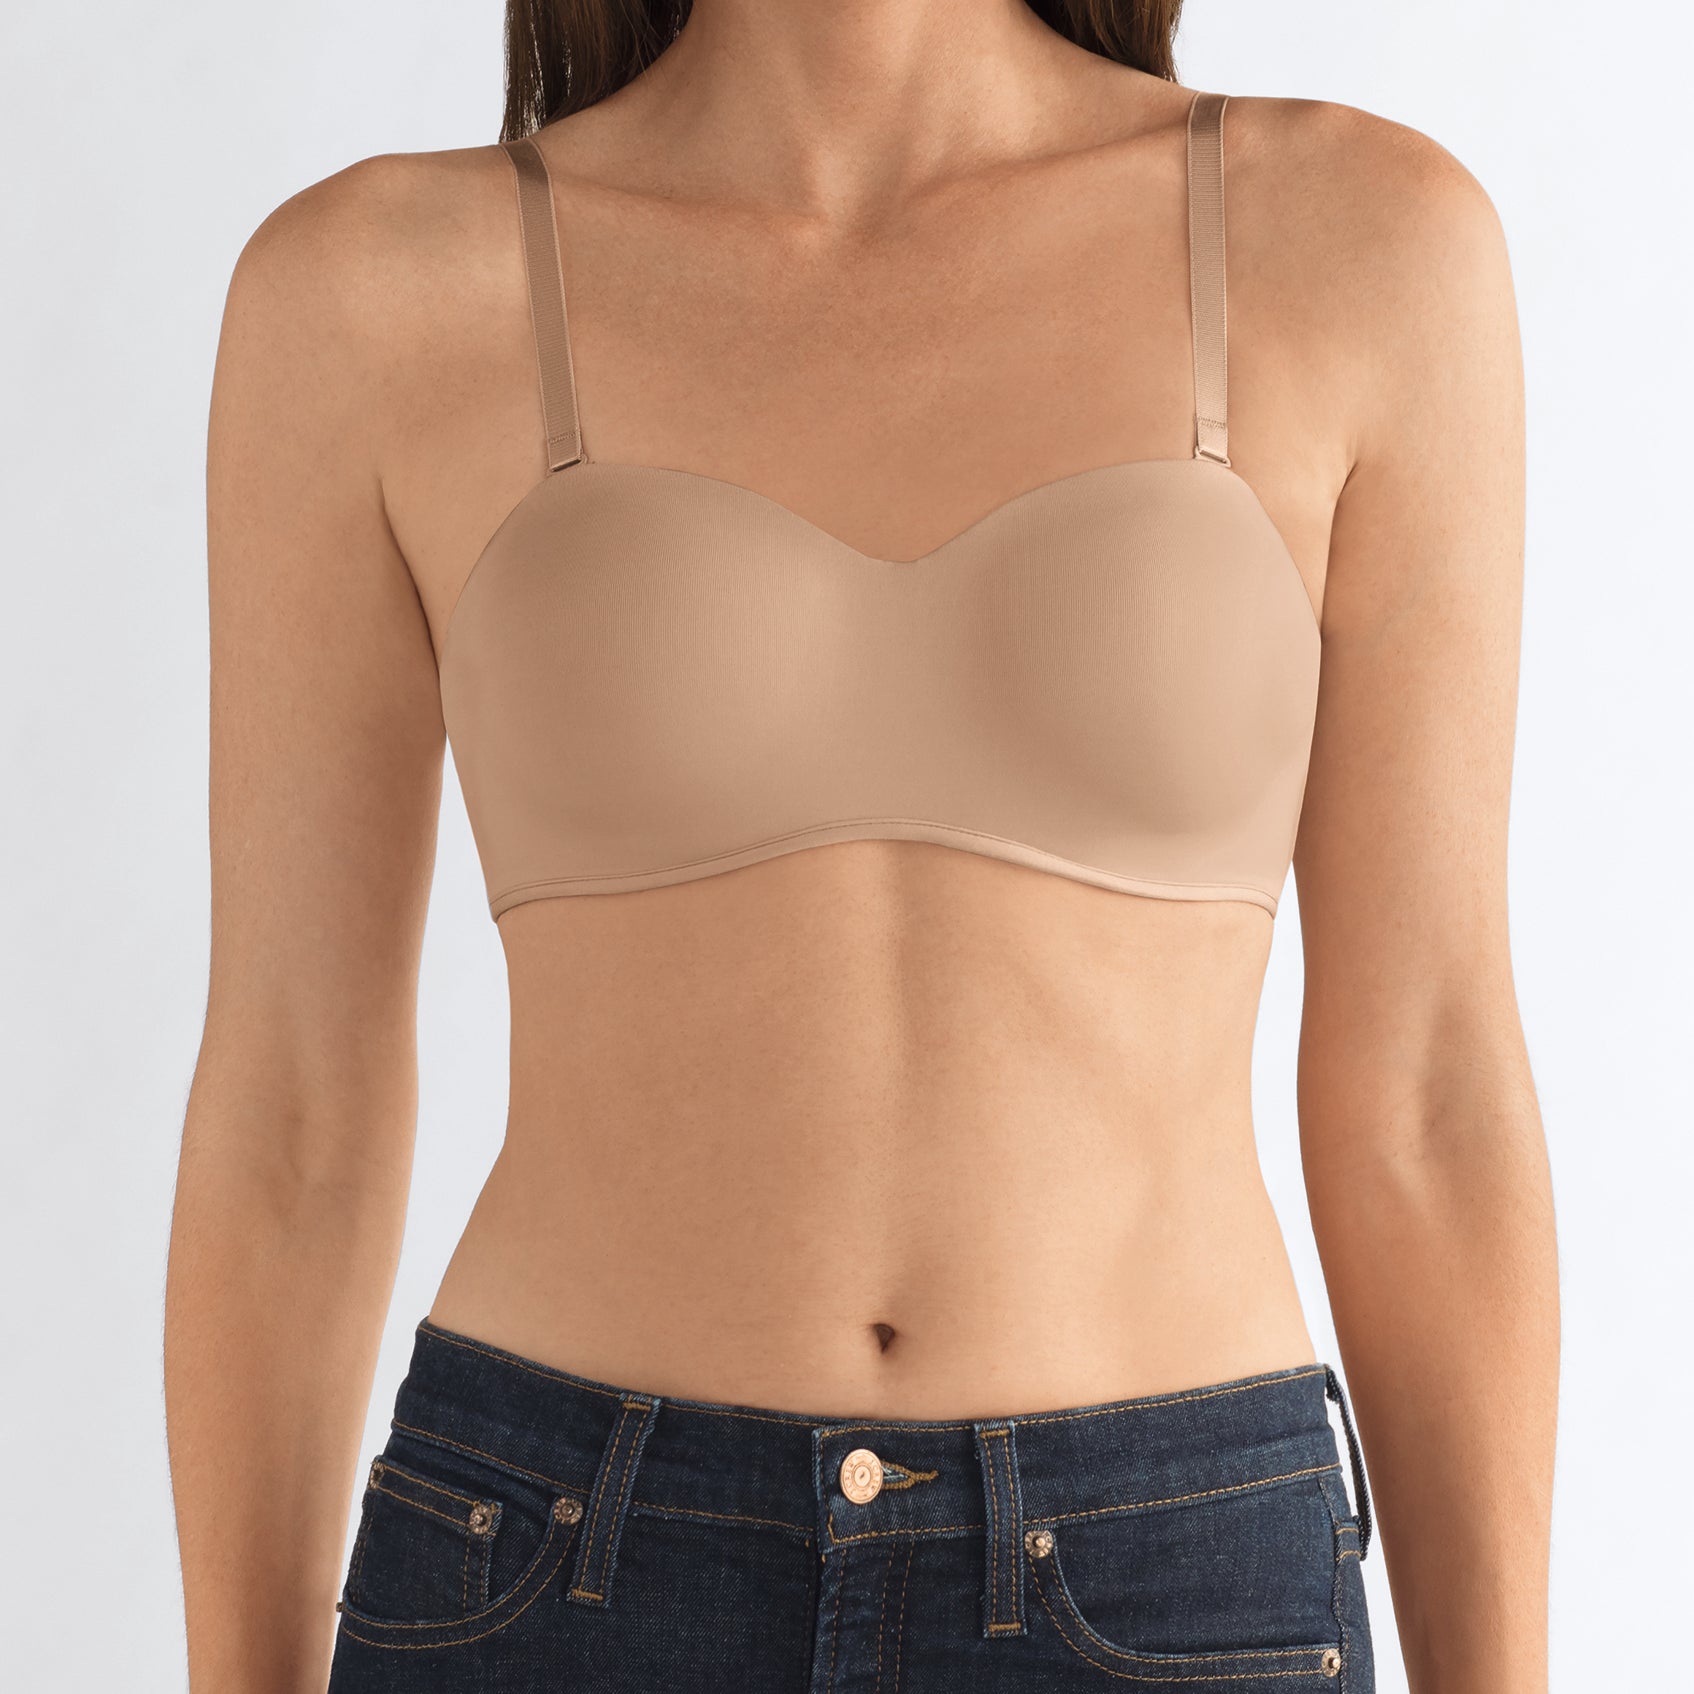 Barbara Strapless - Molded Cup Bra - Nude - Masectomy Bra by Amoena Wire  Free